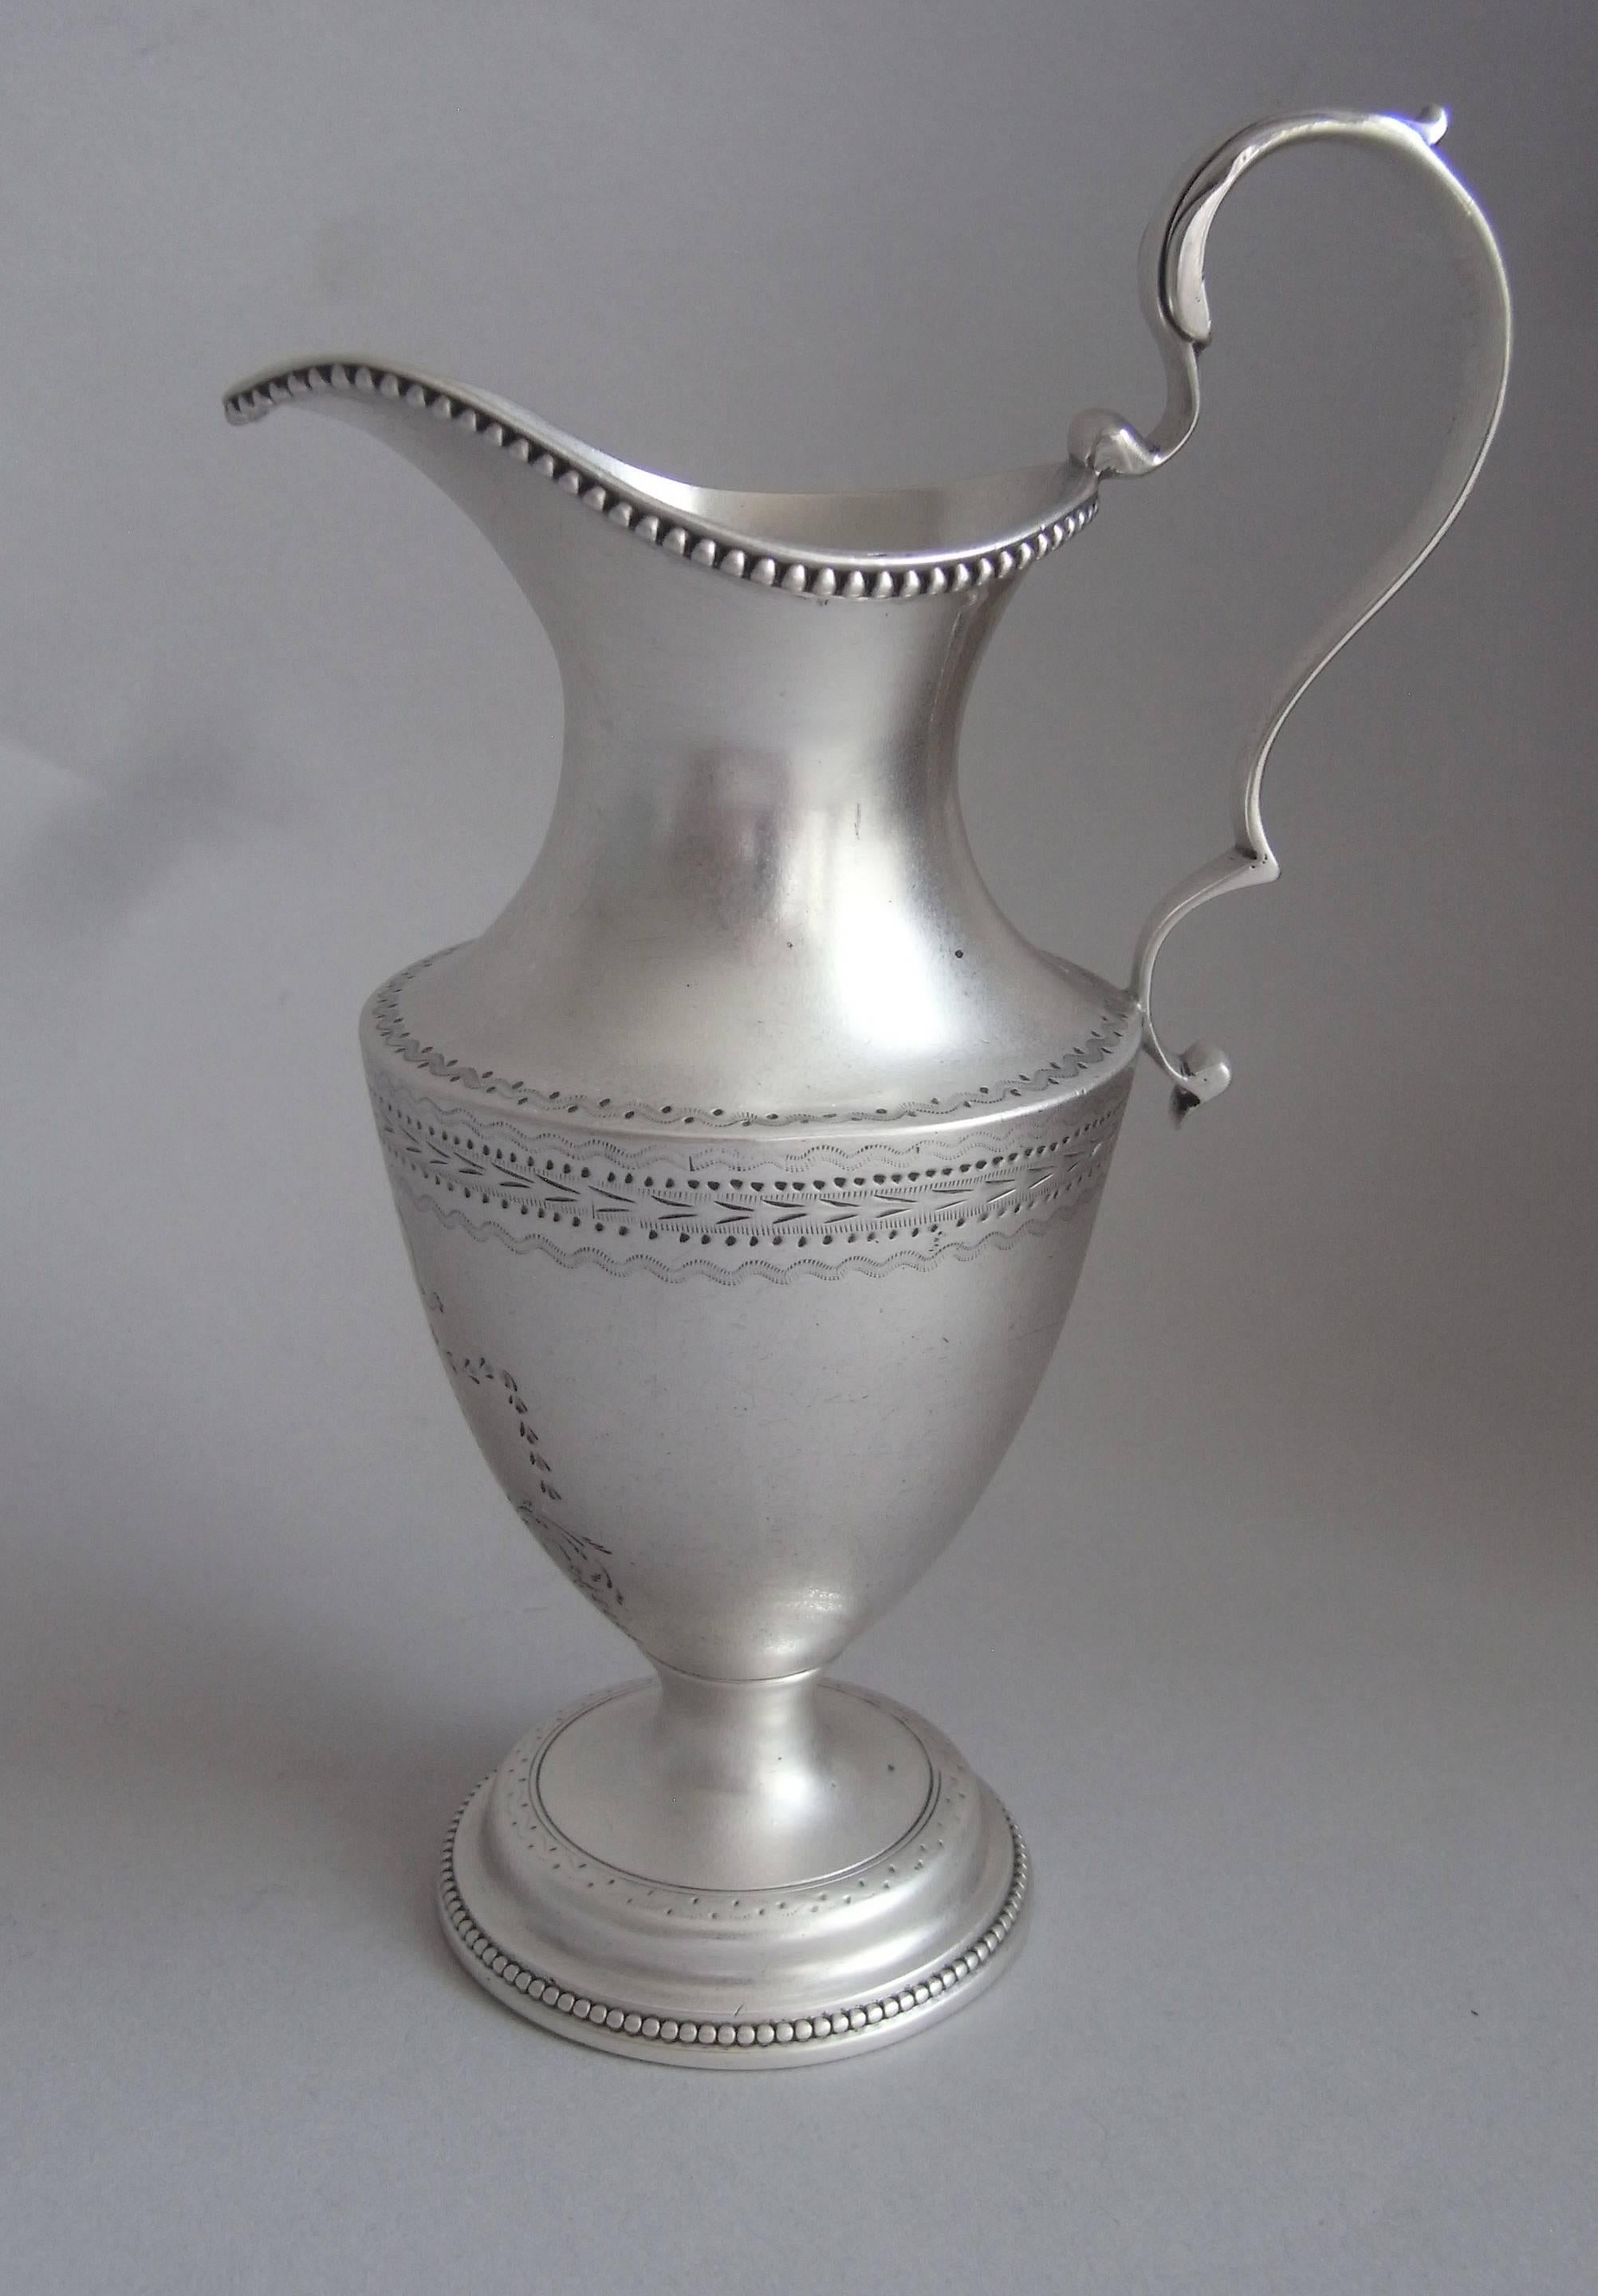 The jug is modelled as a neoclassical Ewer and stands on a stepped circular foot which is decorated with beading and prick dot designs. The vase shaped main body is also engraved with prick dot and bright cut bands. The front displays an oval